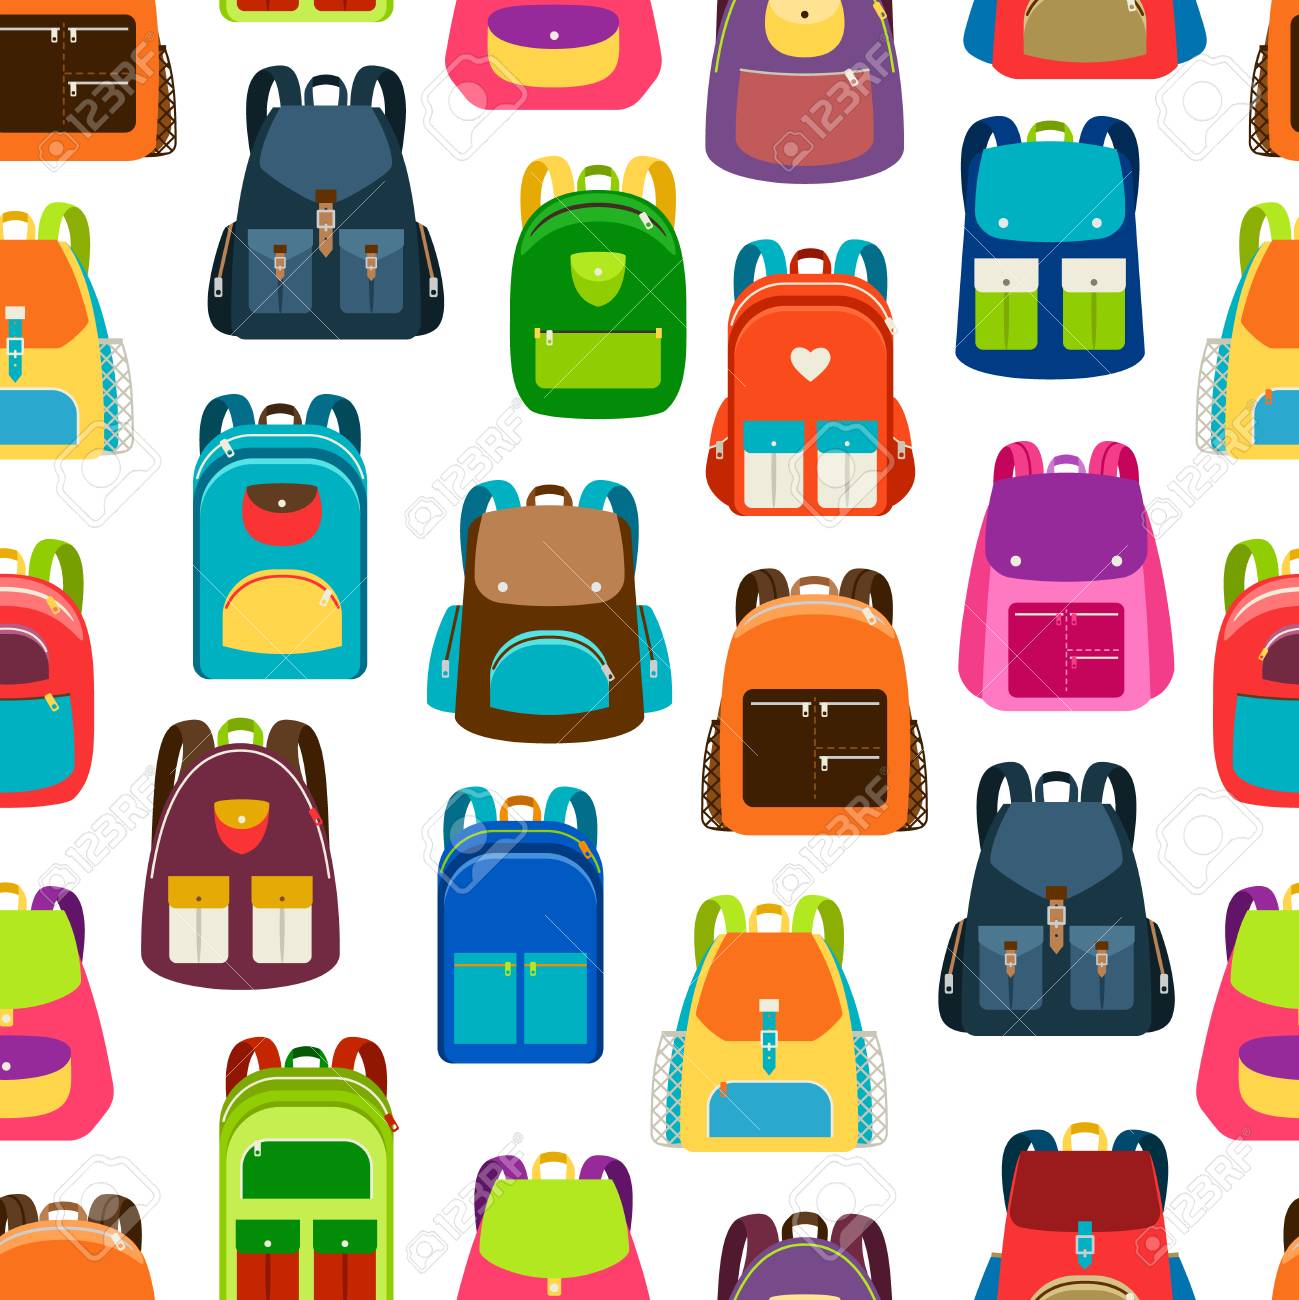 School Cartoon Pattern With Flat Colorful Backpacks And Rucksacks